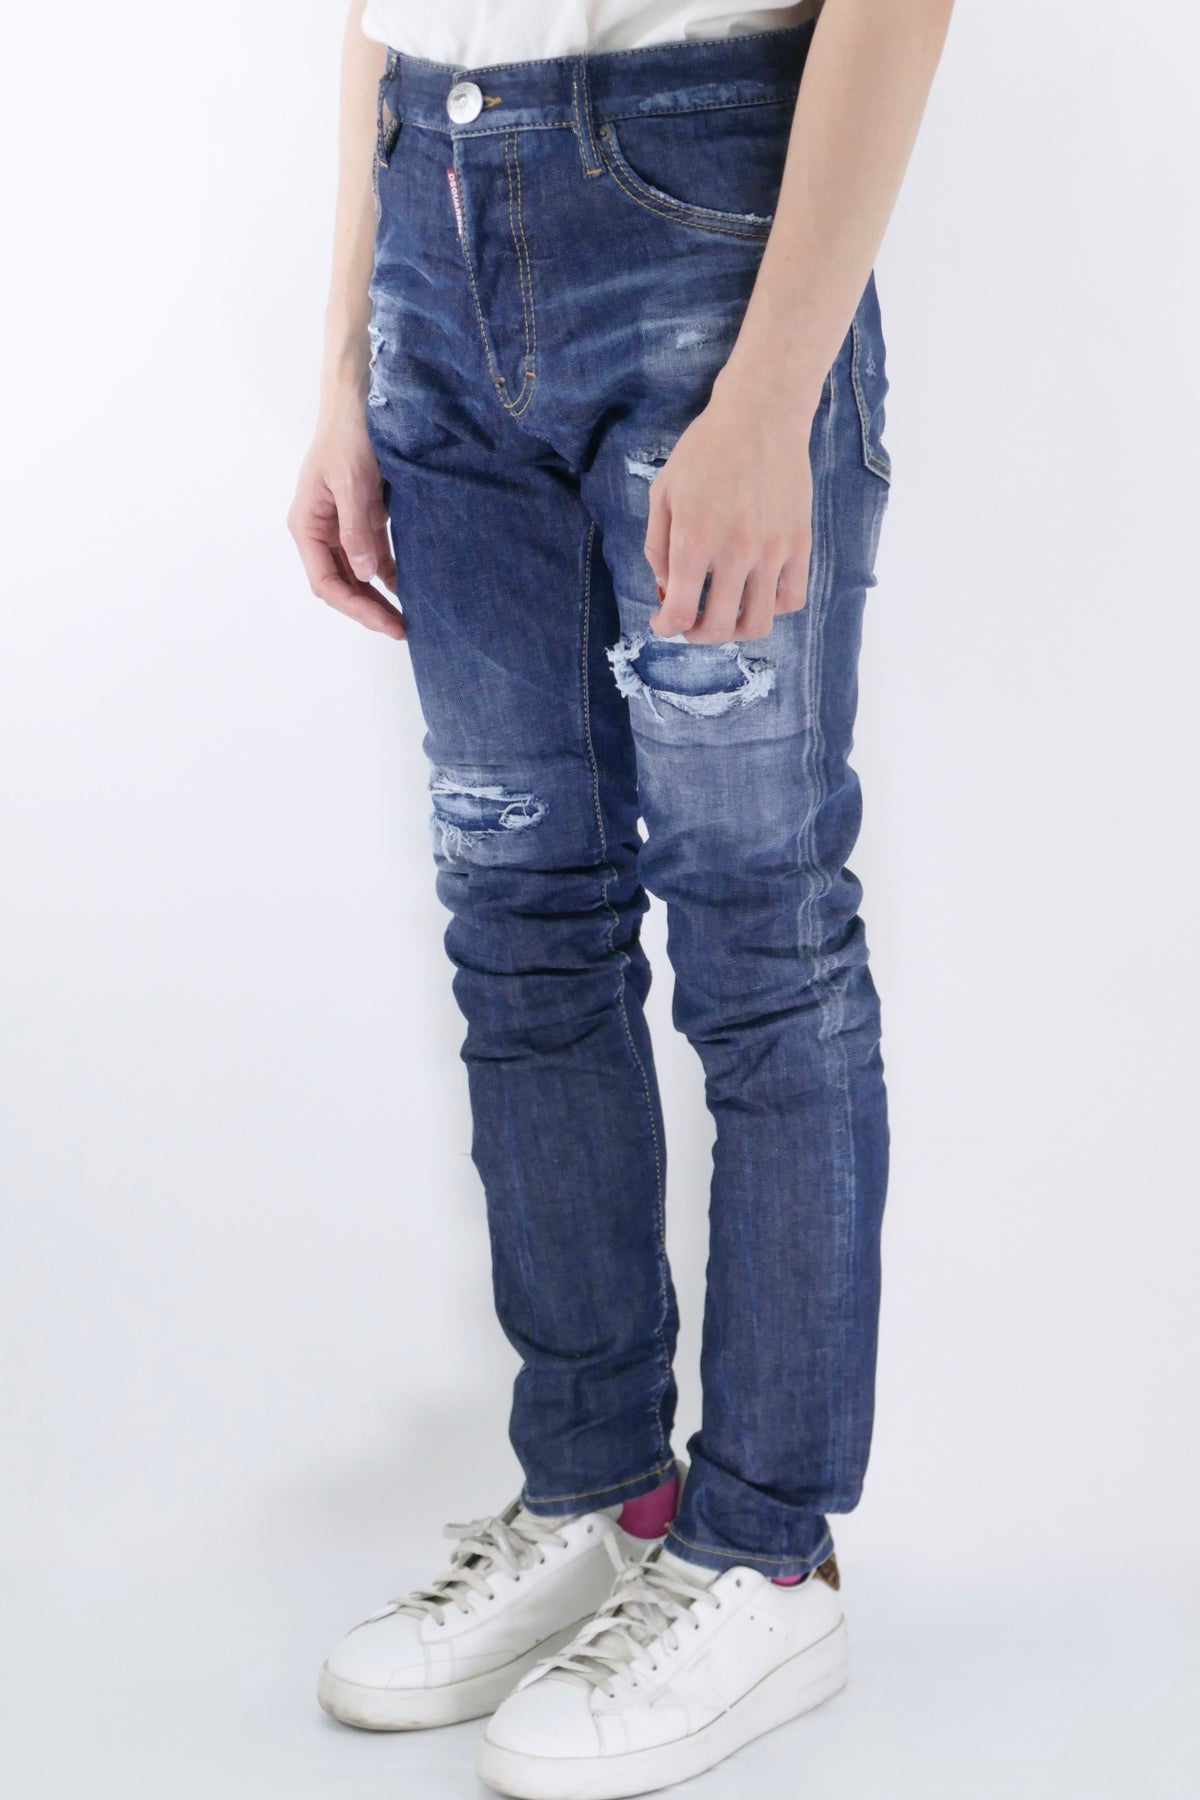 Dsquared2 Cool Guy Jeans - Navy Blue